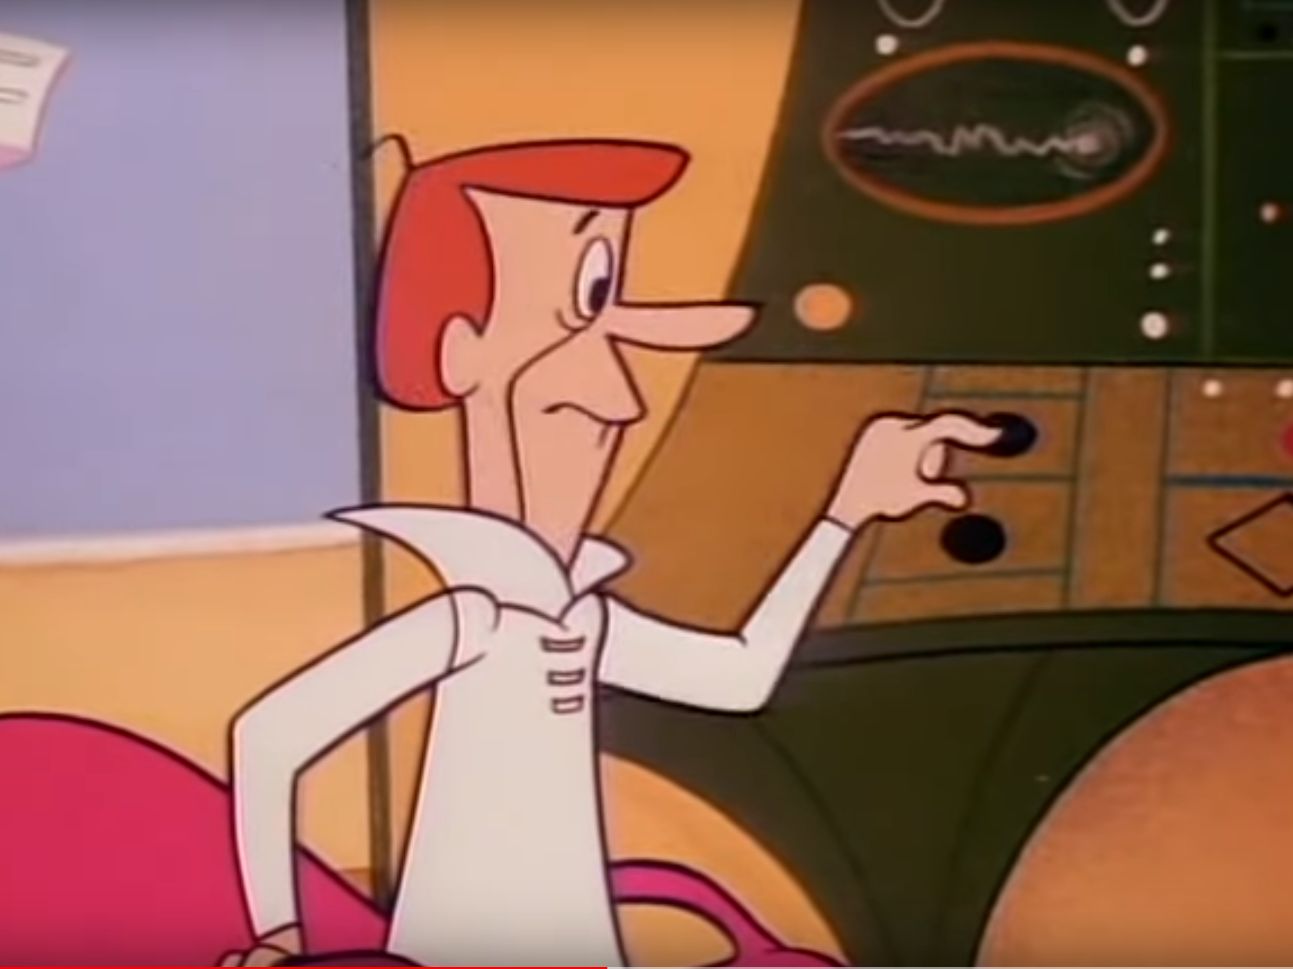 George Jetson is pushing a button at work attached to a machine, wearing a white top and looking slightly worried 